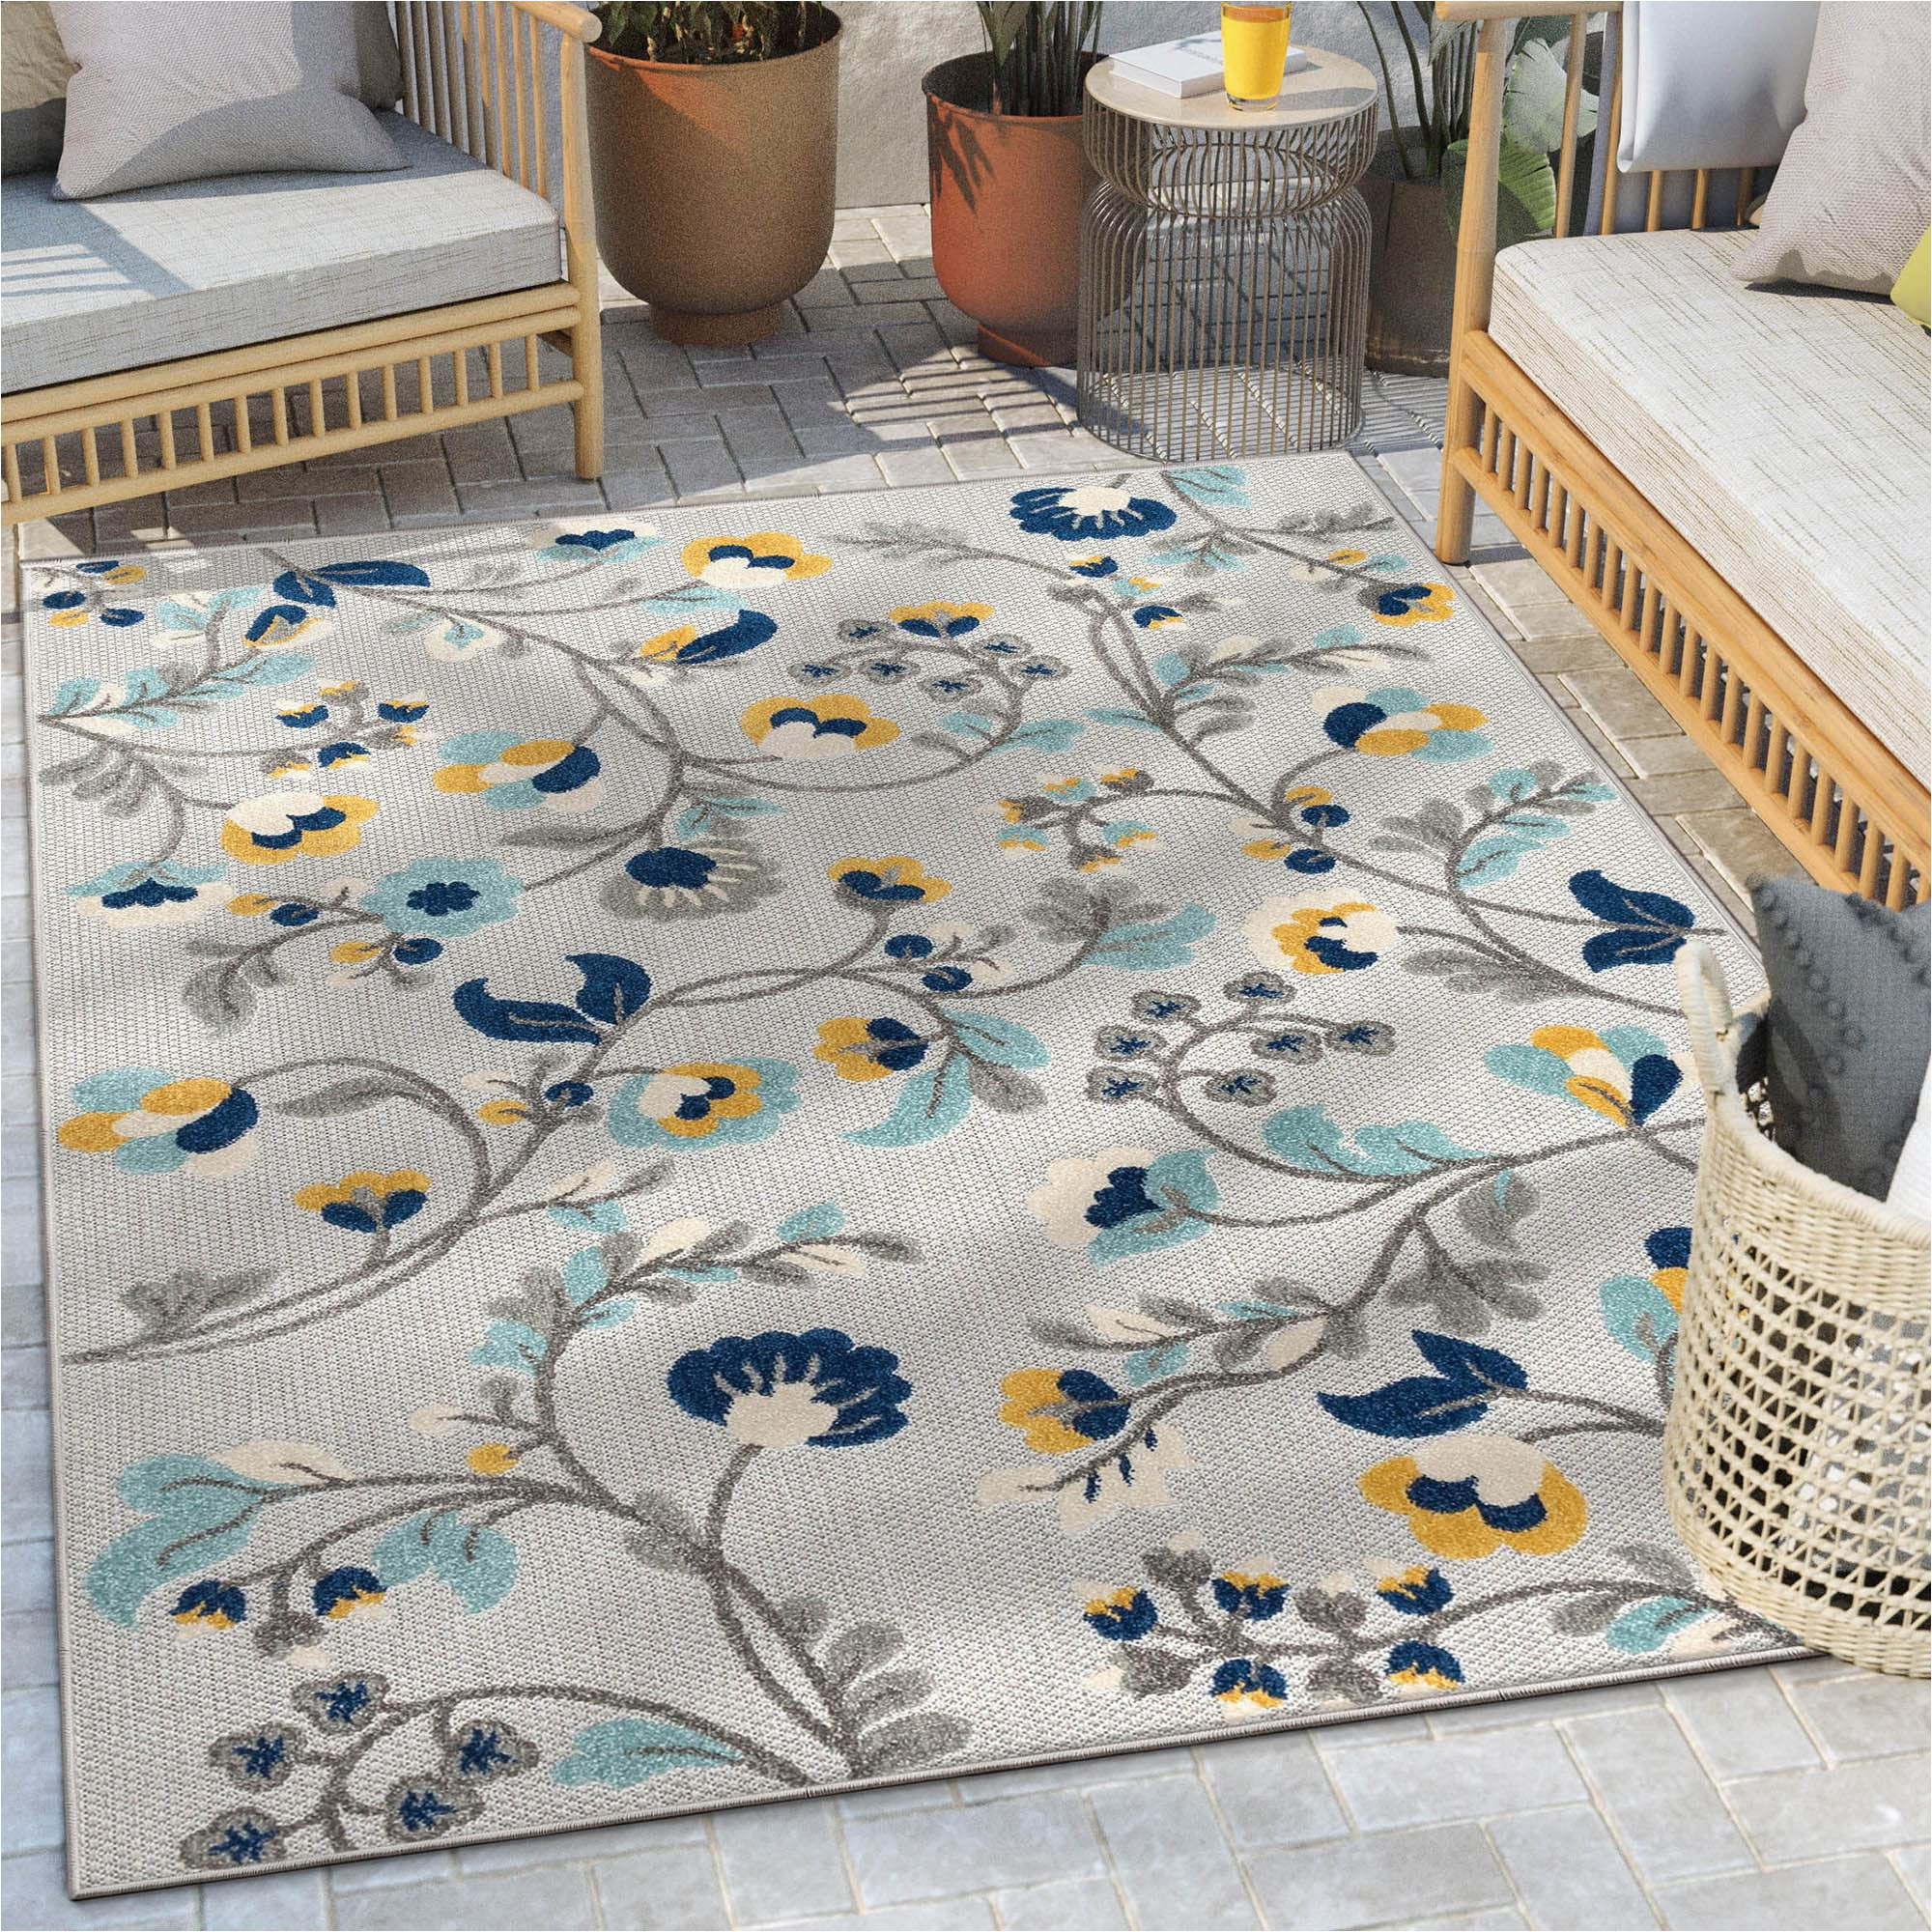 Pier One area Rugs 5×7 Well Woven Darla Floral Grey Indoor/outdoor area Rug 5×7 (5’3″ X 7’3″) High Traffic Stain Resistant Modern Carpet